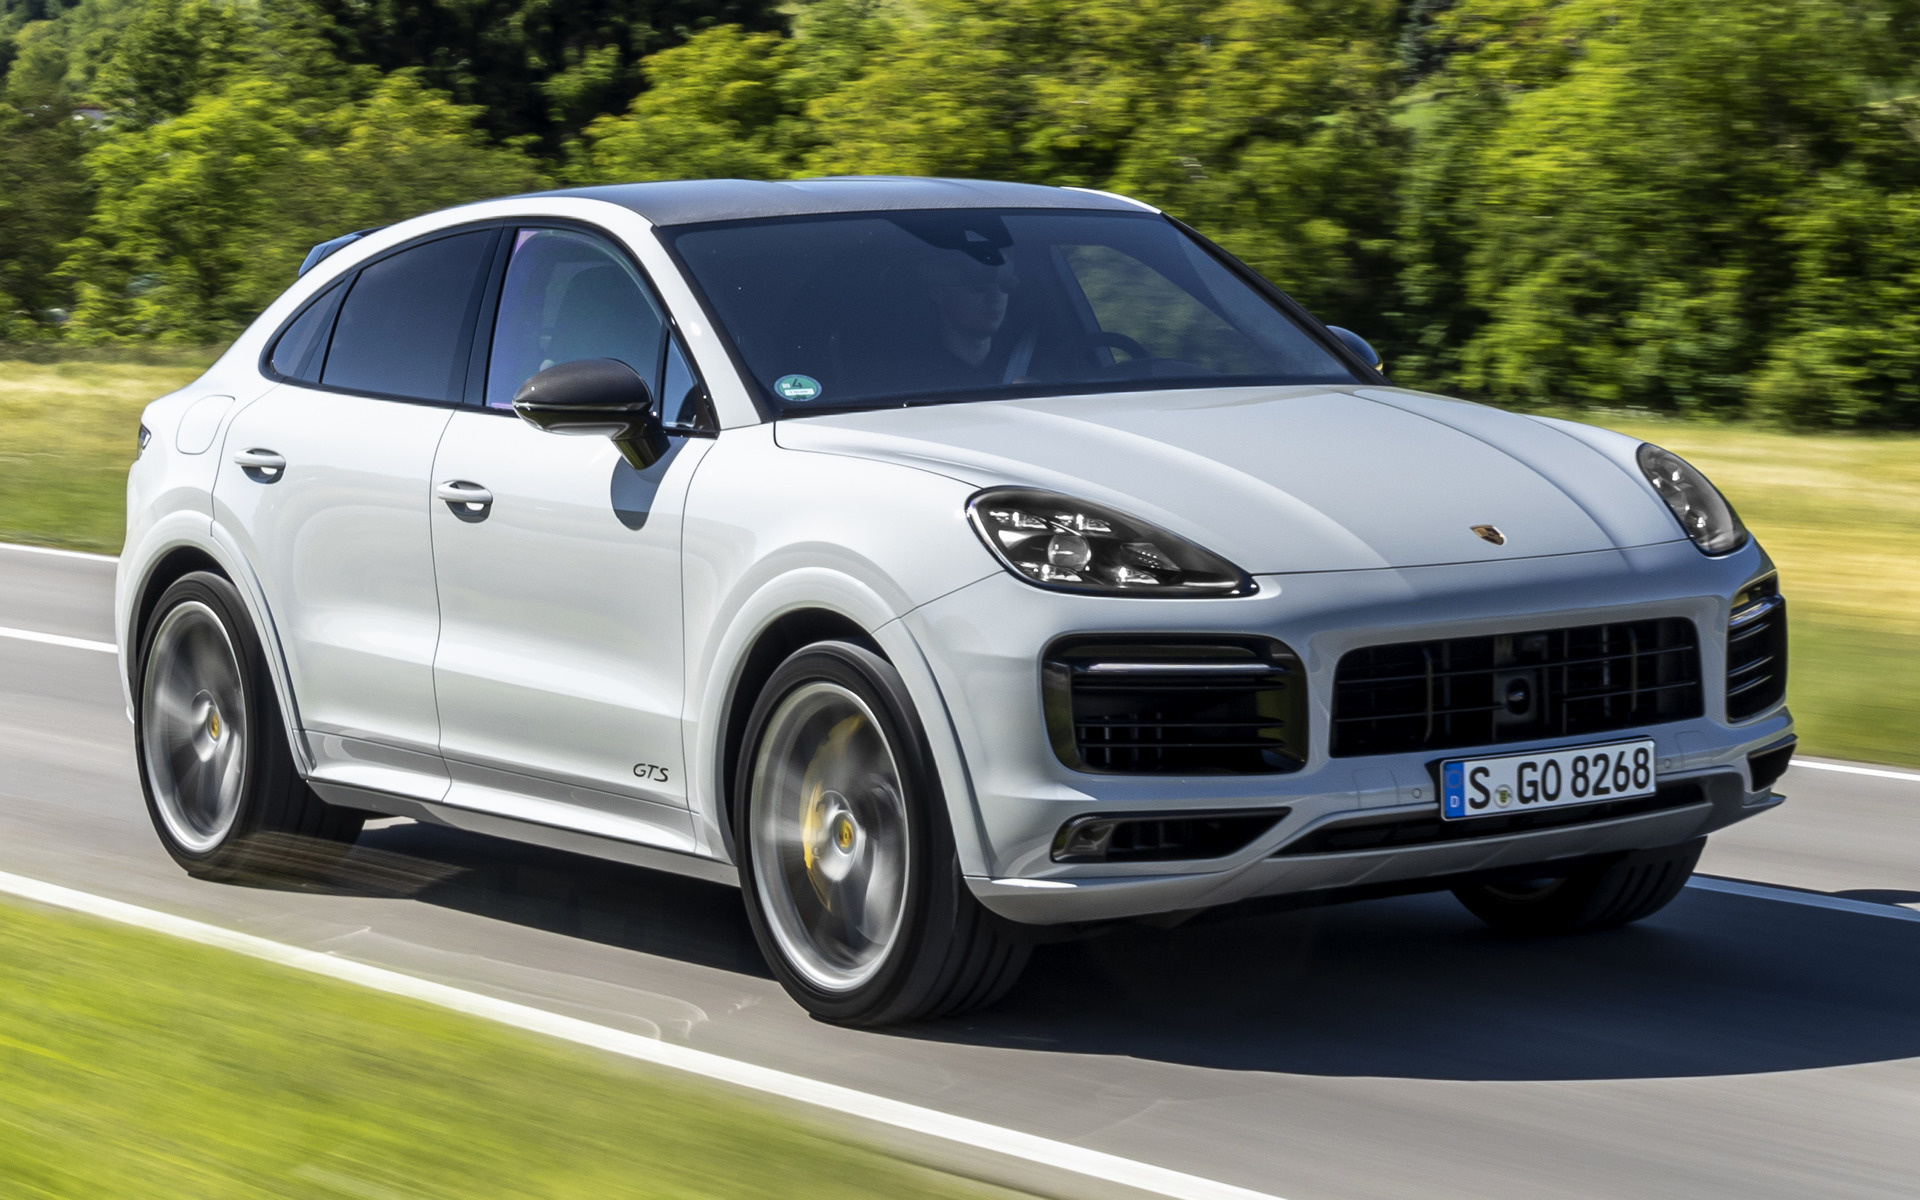 2020 Porsche Cayenne GTS Coupe Wallpapers and HD Images